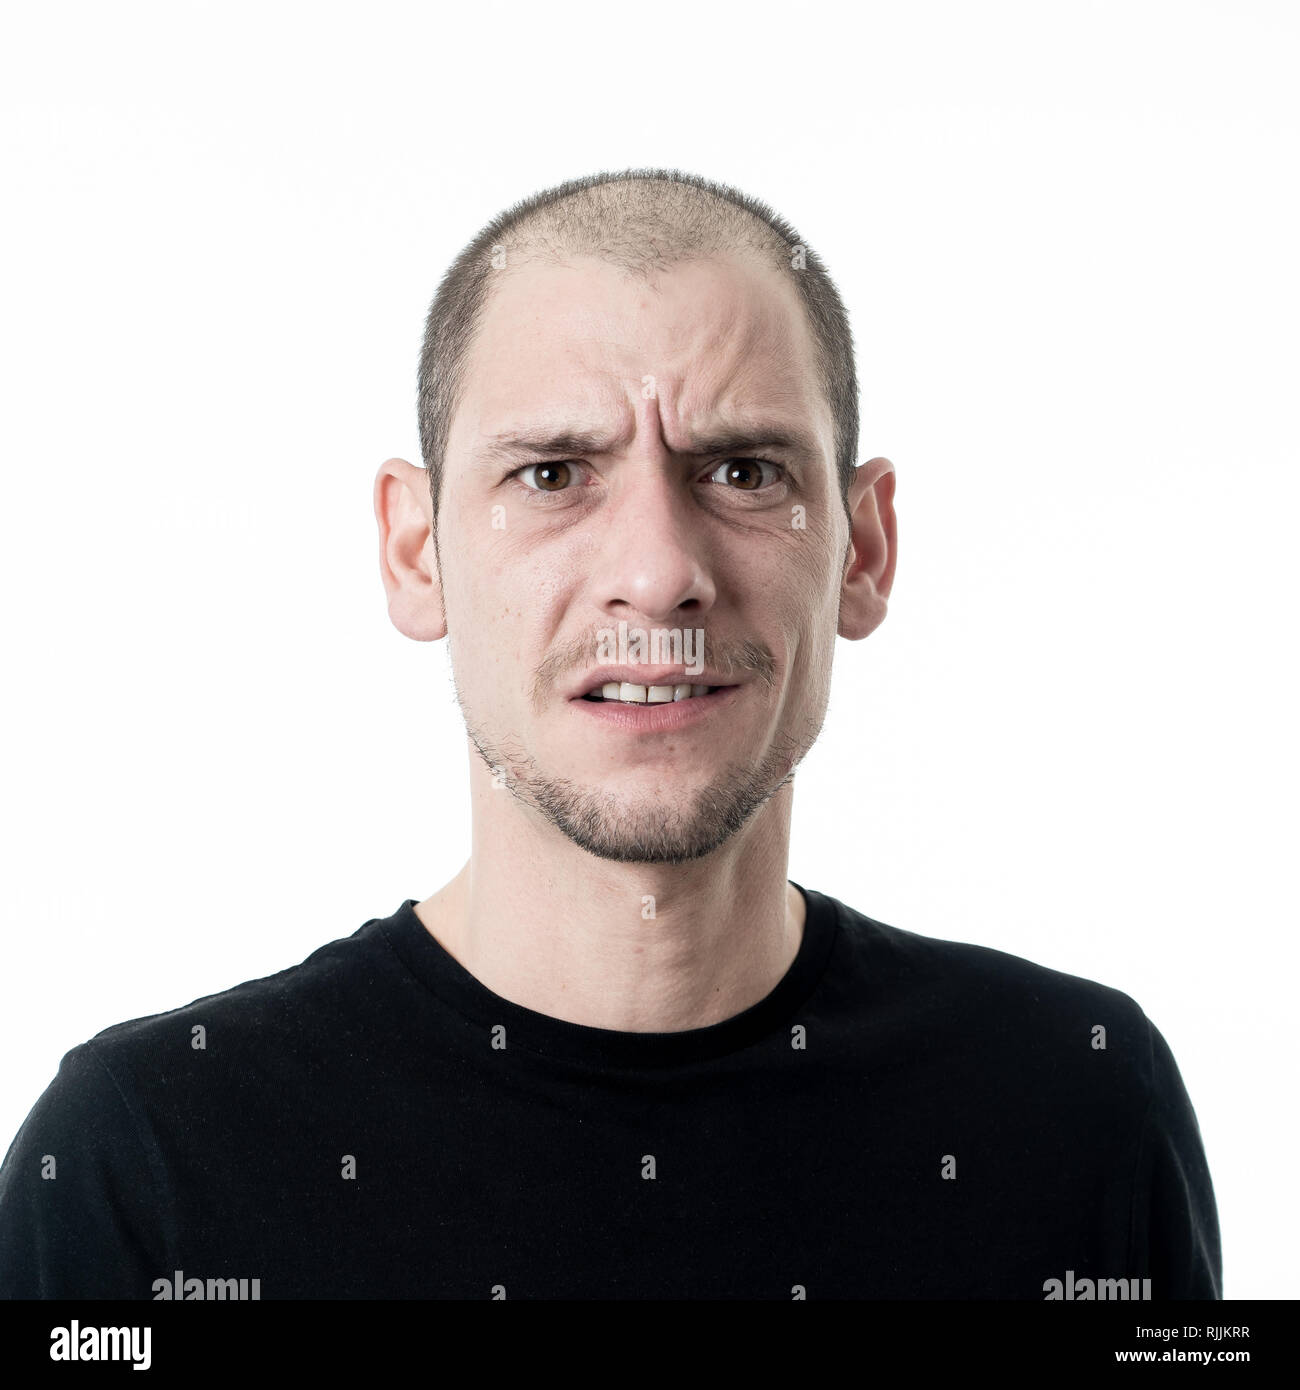 Puzzled Look Man Stock Photos & Puzzled Look Man Stock Images - Alamy